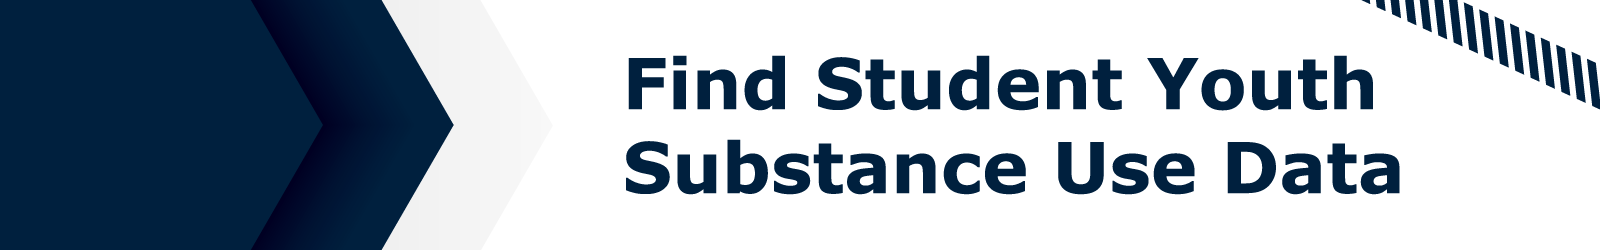 Find Student Youth Substance Use Data